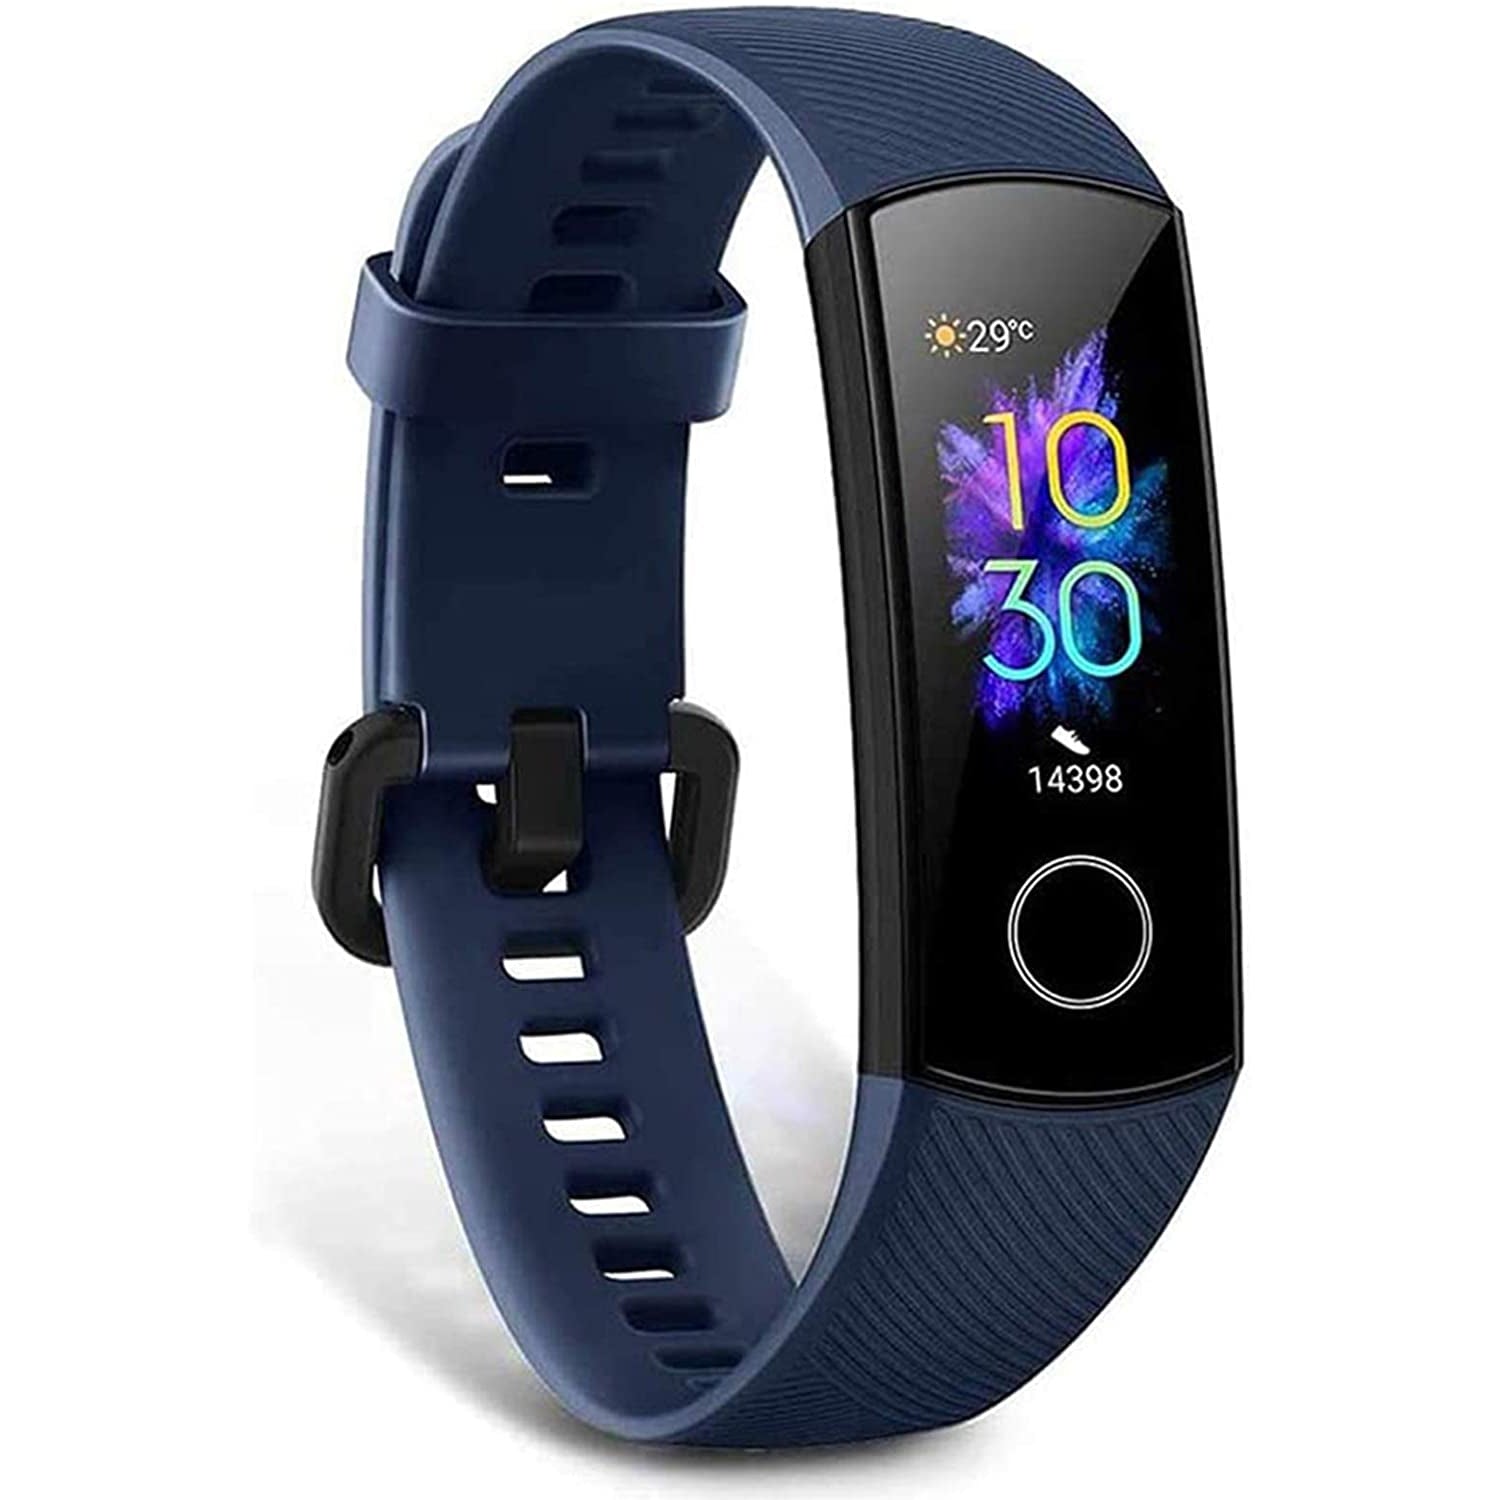 HONOR Band 5 Fitness Tracker with SpO2 Heart Rate and Sleep Monitor - Blue- Refurbished Good